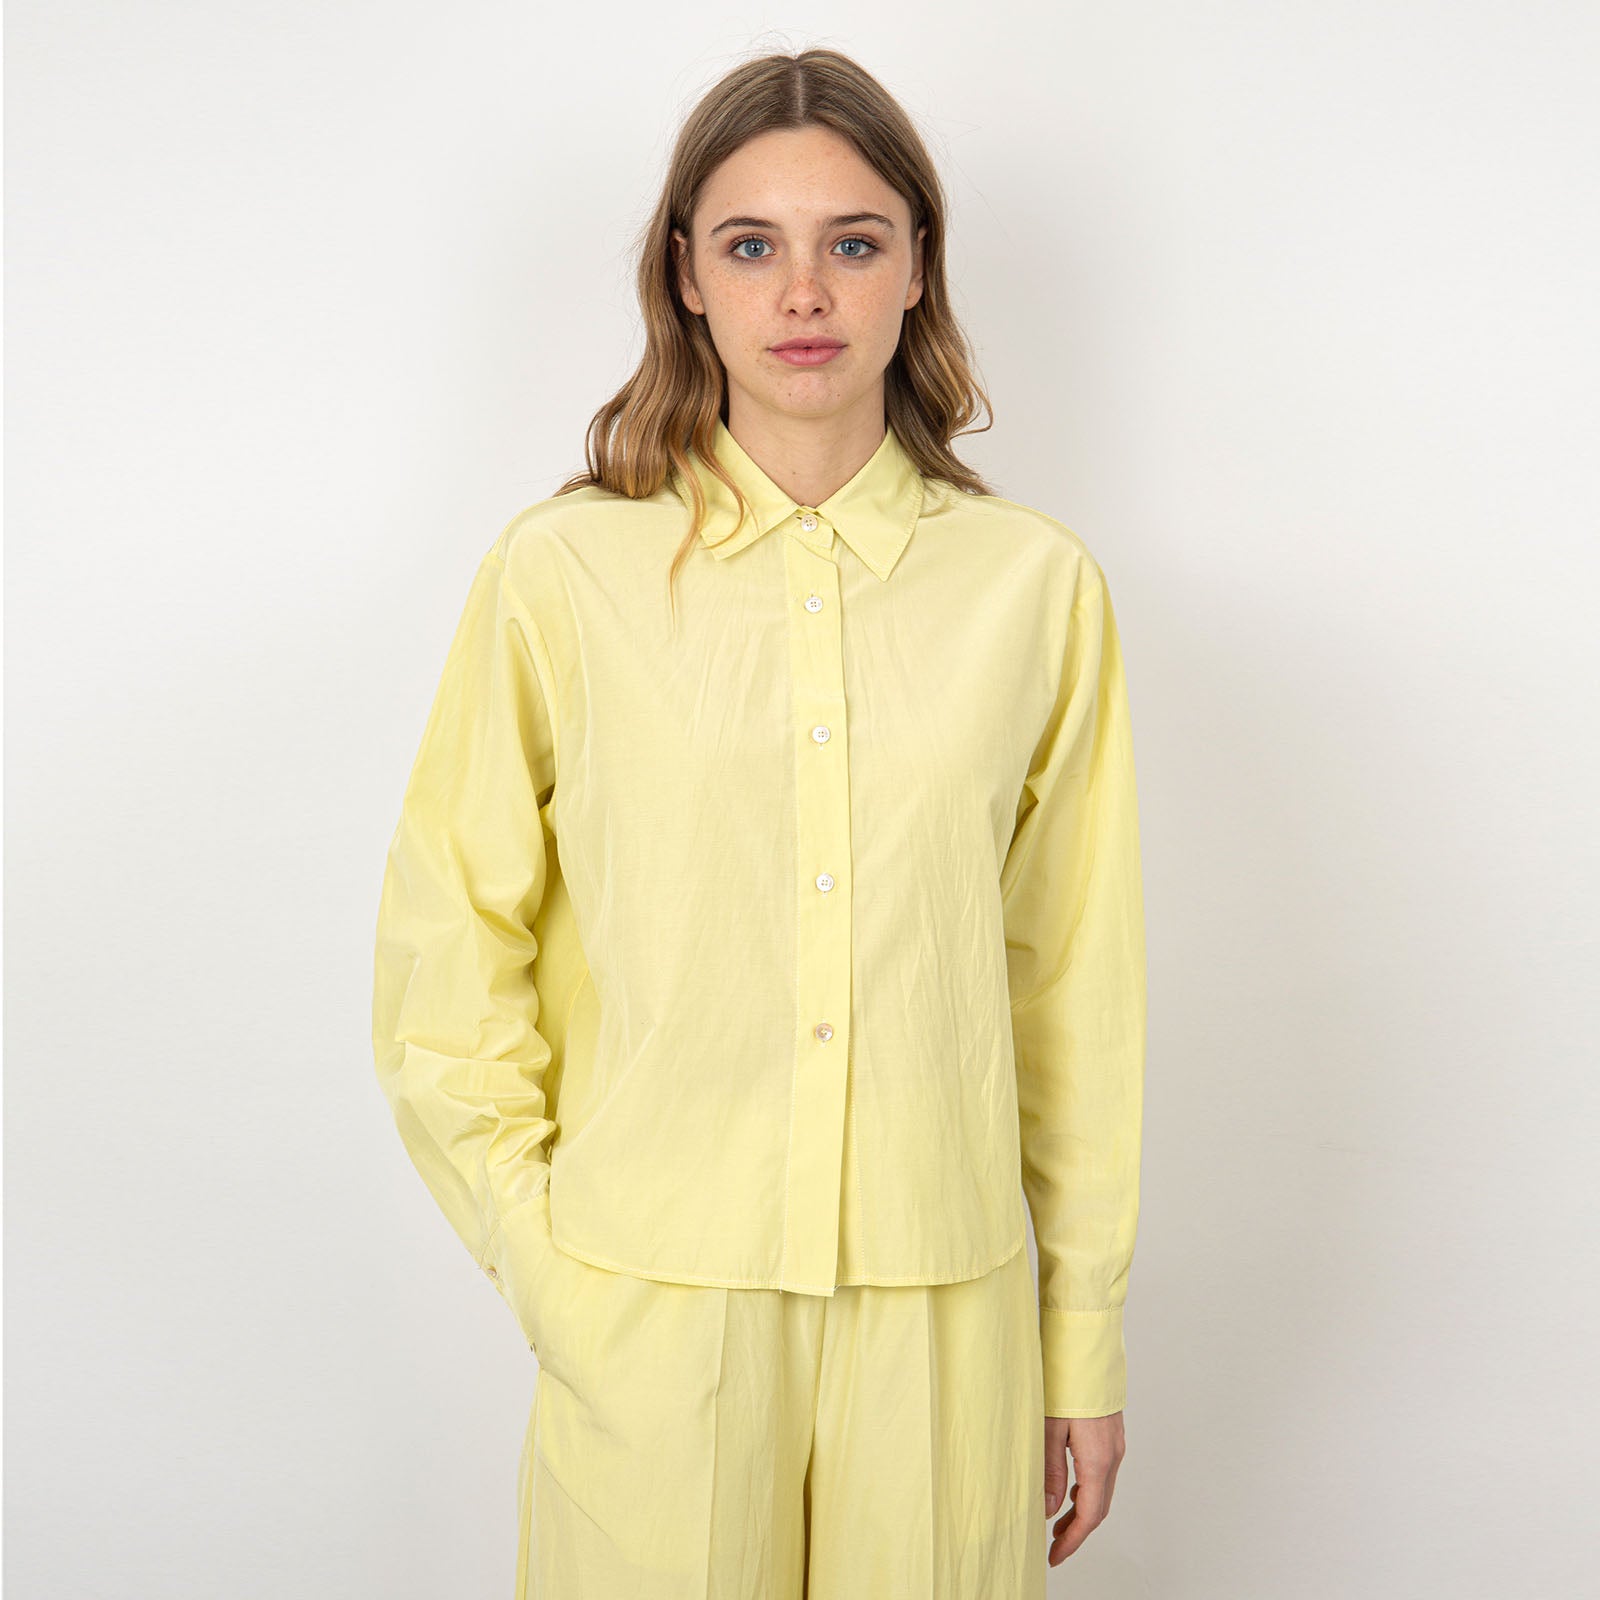 Forte Forte Boxy Chic Cotton Shirt in Yellow - 7